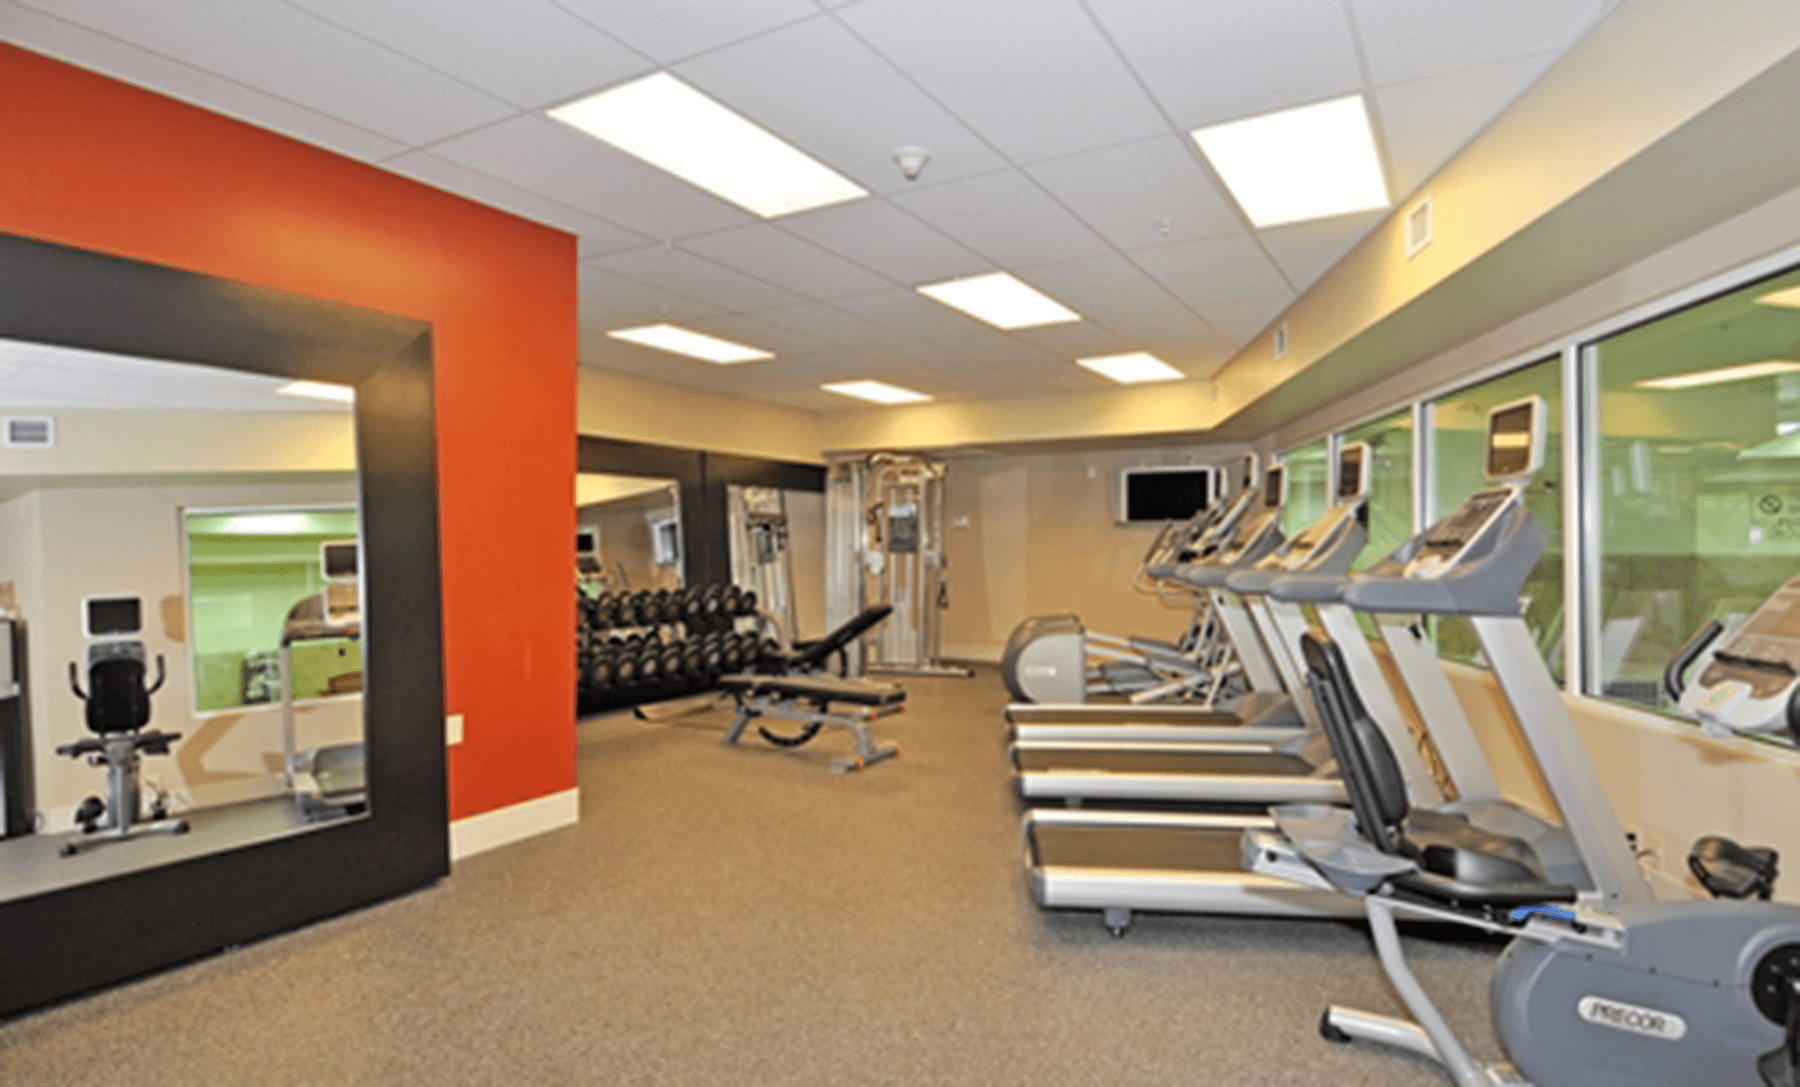  Homewood Suites fitness room interior with exercise machines 